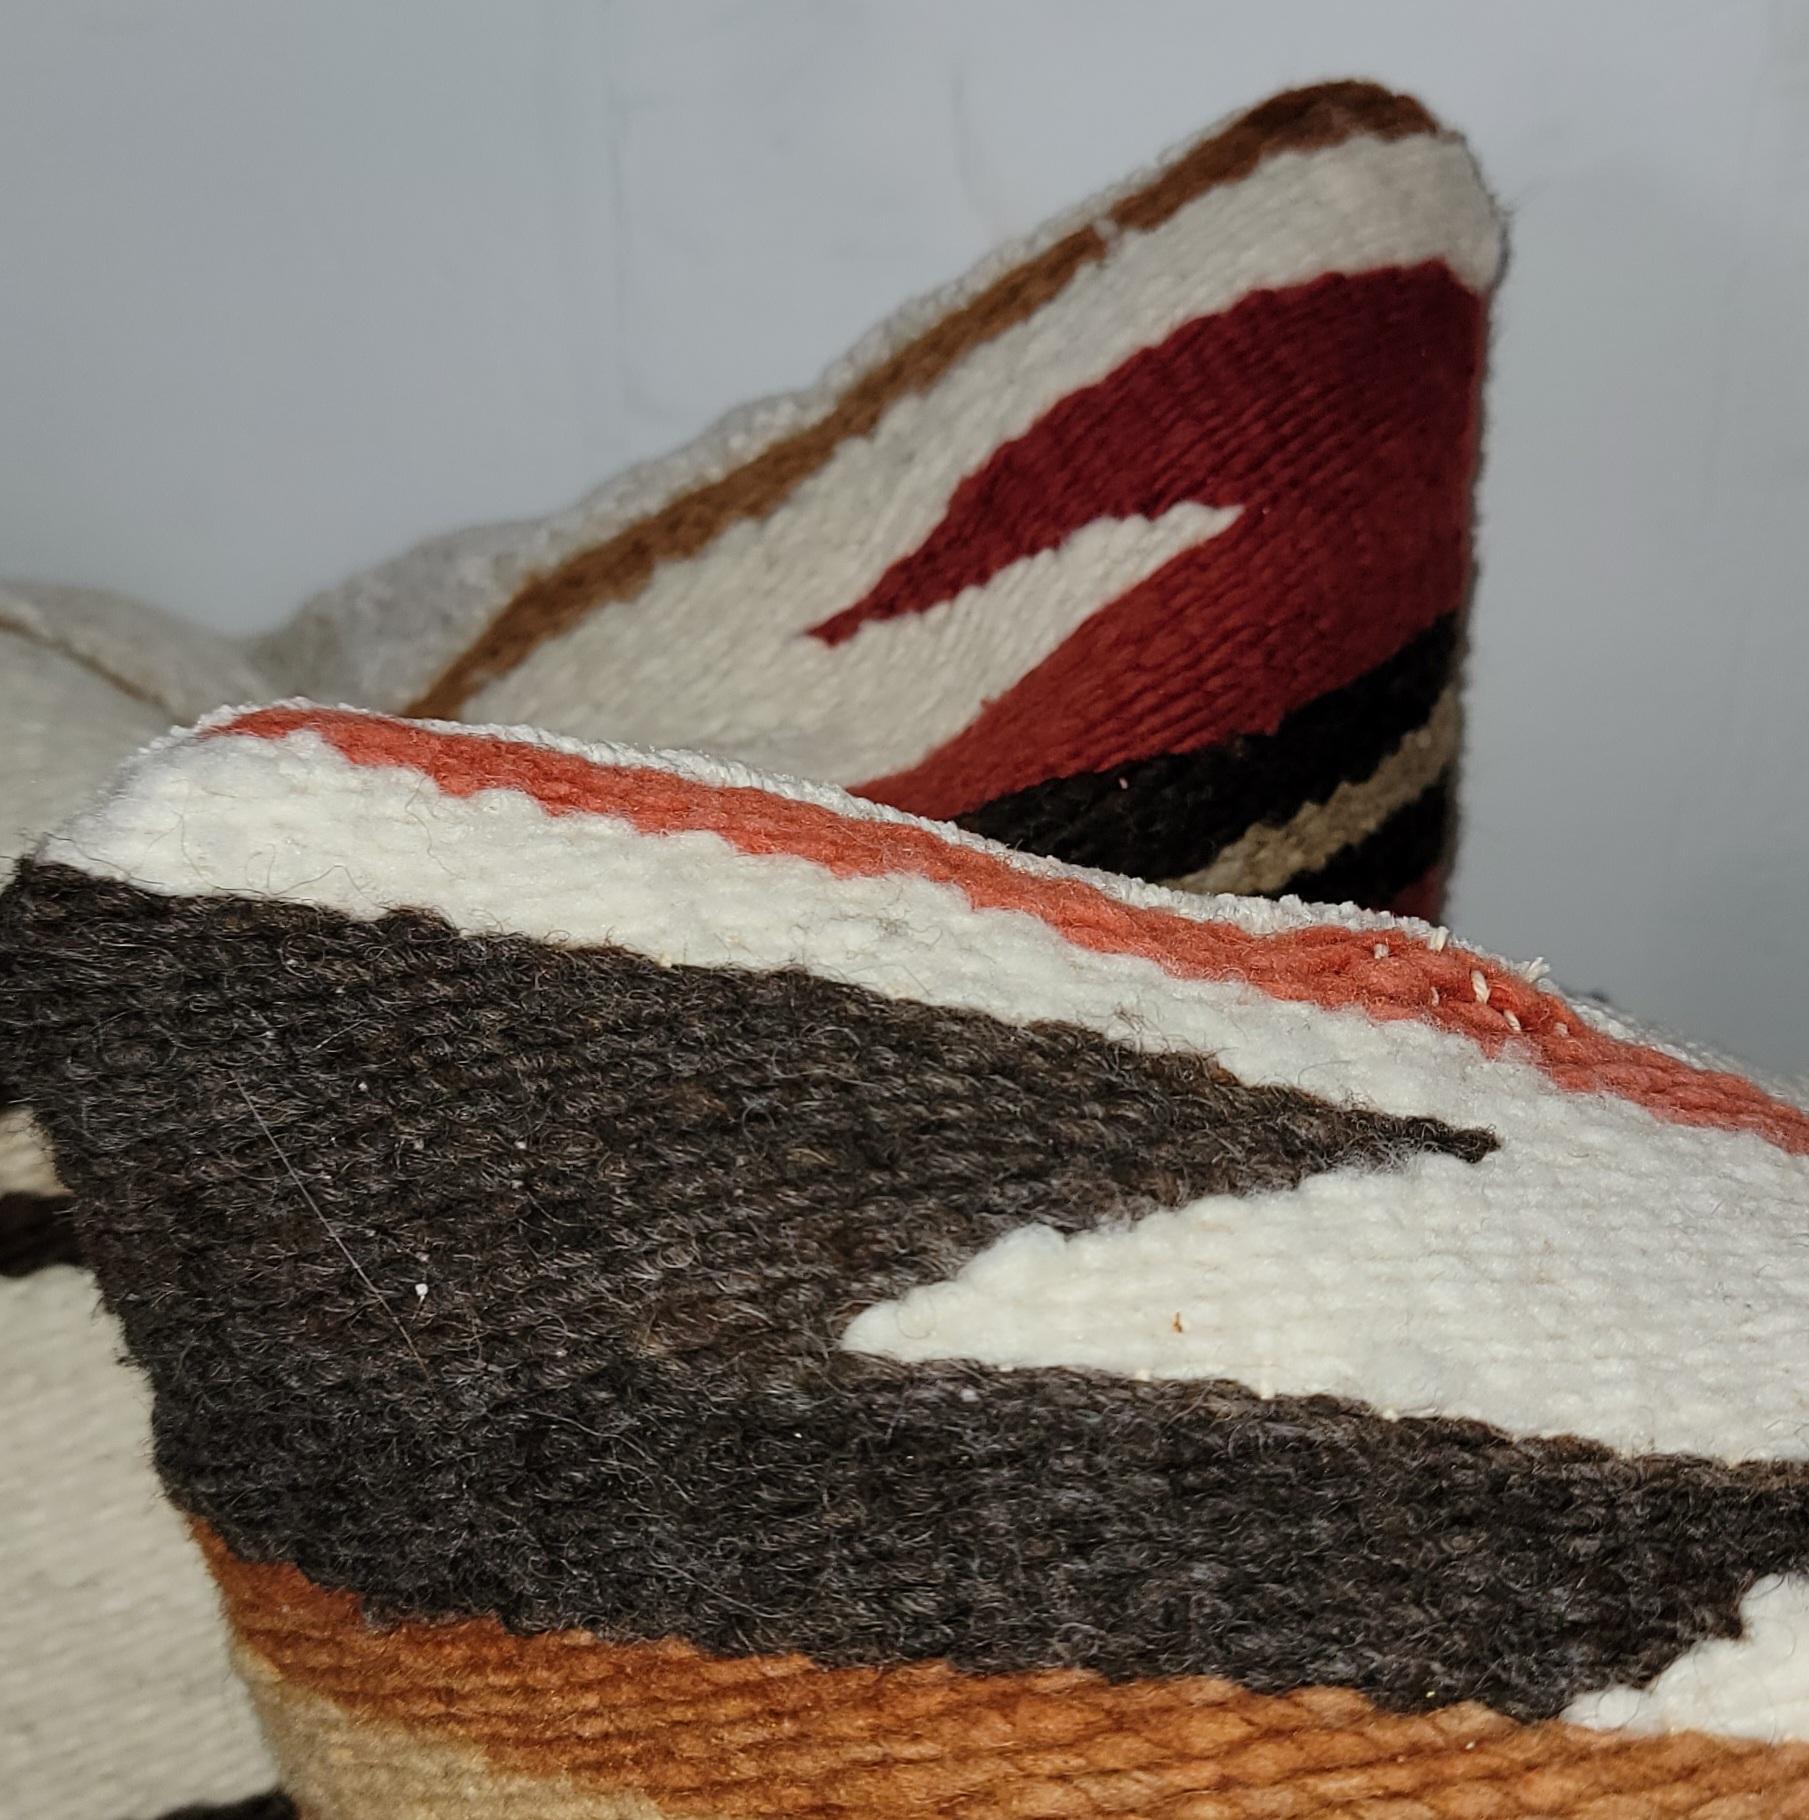 Navajo Indian eye dazzler weaving pillows - pair. Off white Chenille backing and zippered shams. Down and feather inserts.
Measures: 18 x 17.